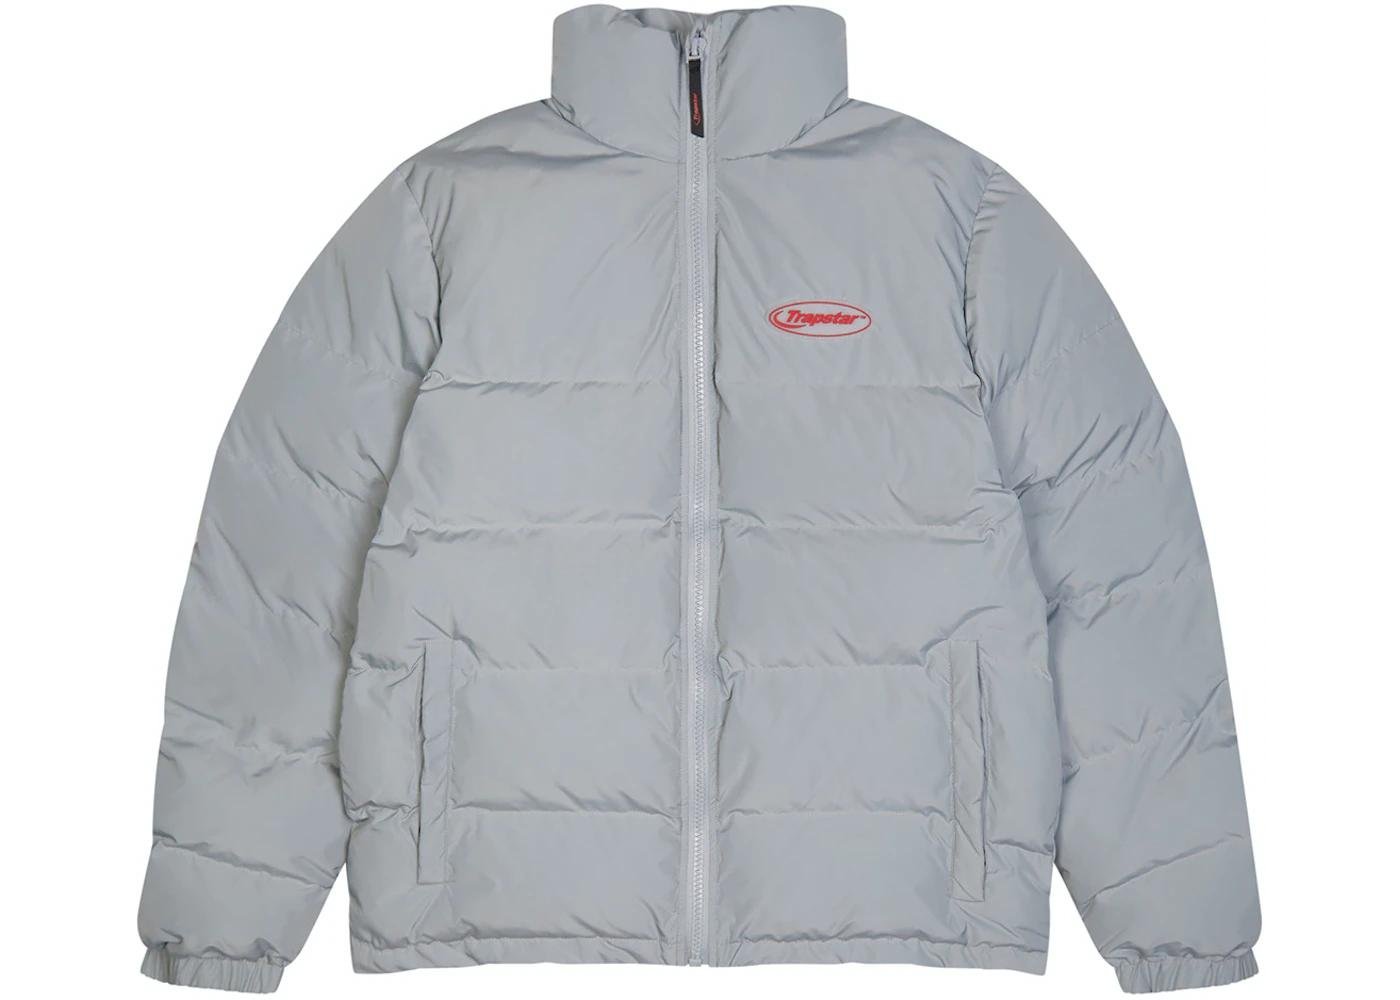 Hyperdrive Puffer Jacket Light Grey/Red by TRAPSTAR